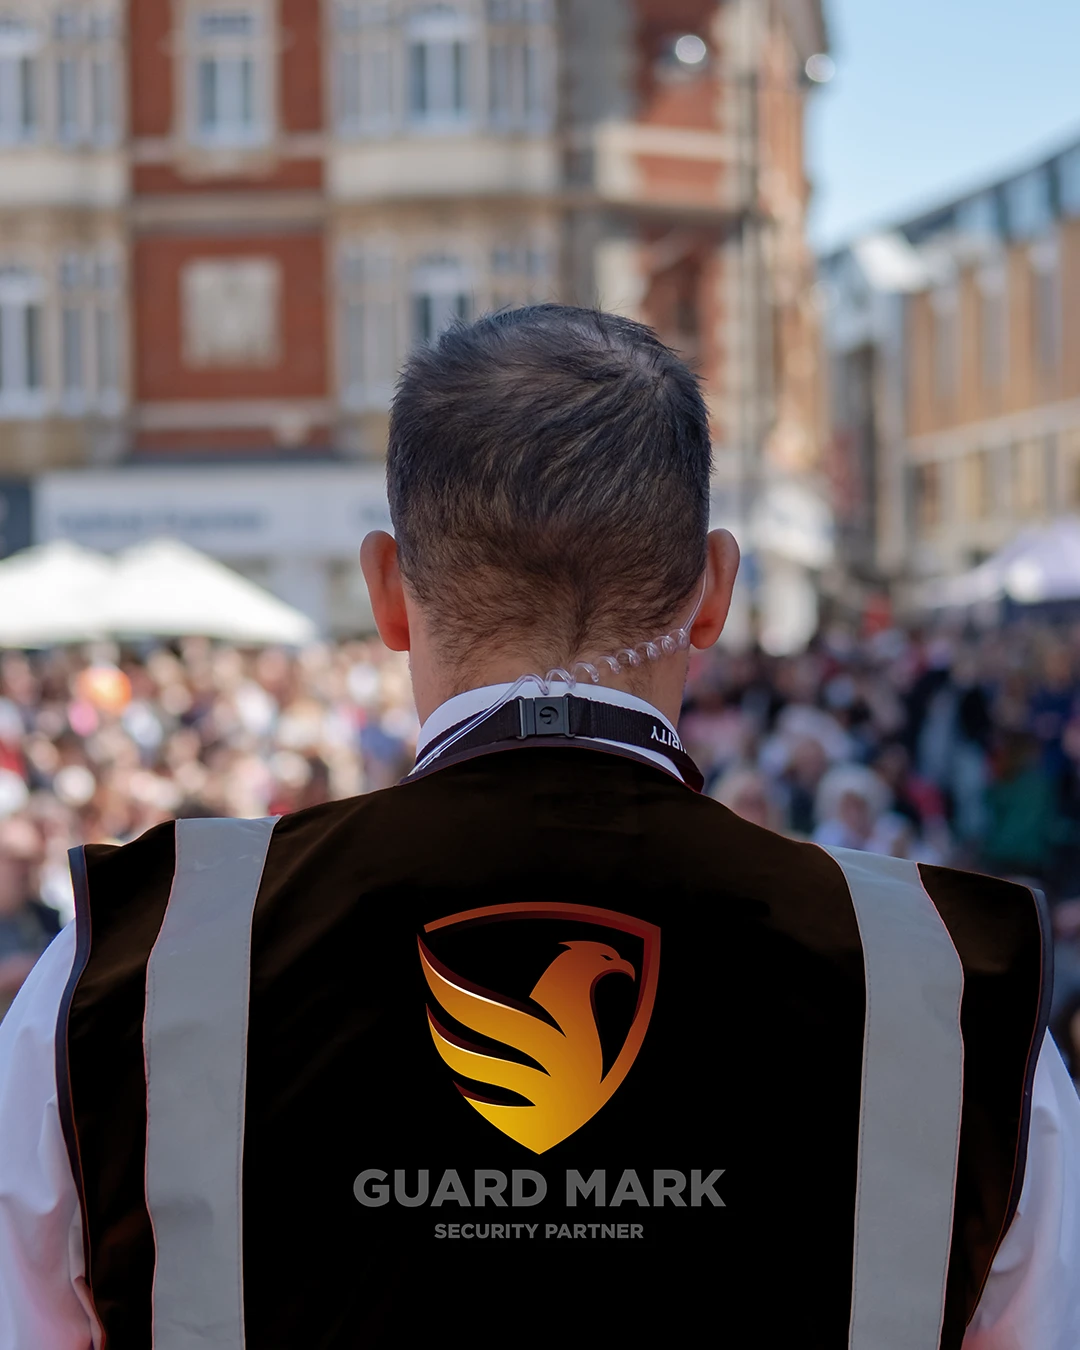 UK event security Guard in Guard Mark uniform performs duty, manages anti-social behavior, maintains safety professionally.